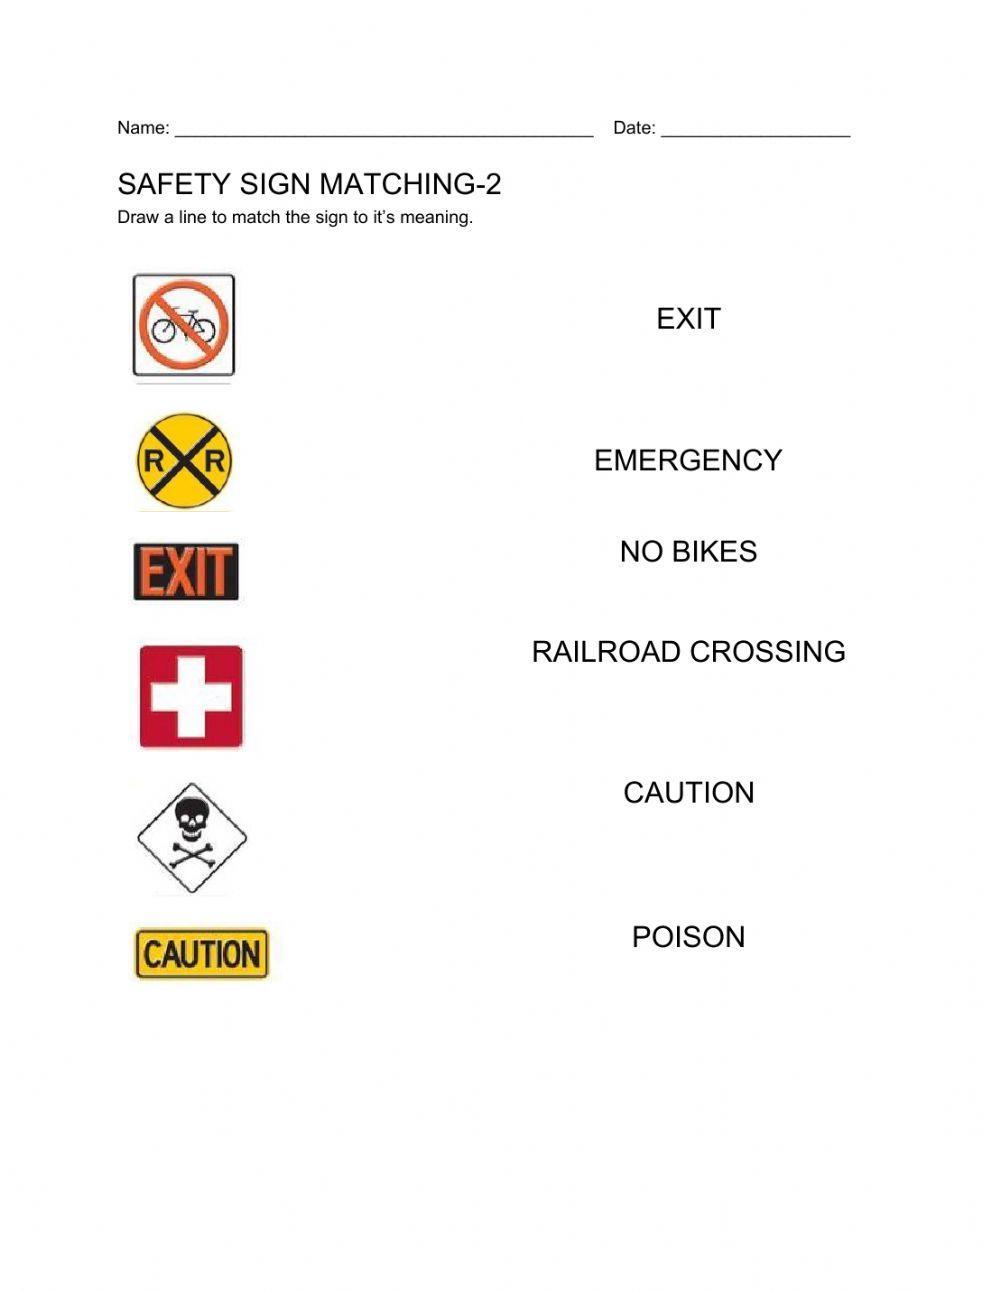 Safety signs-2